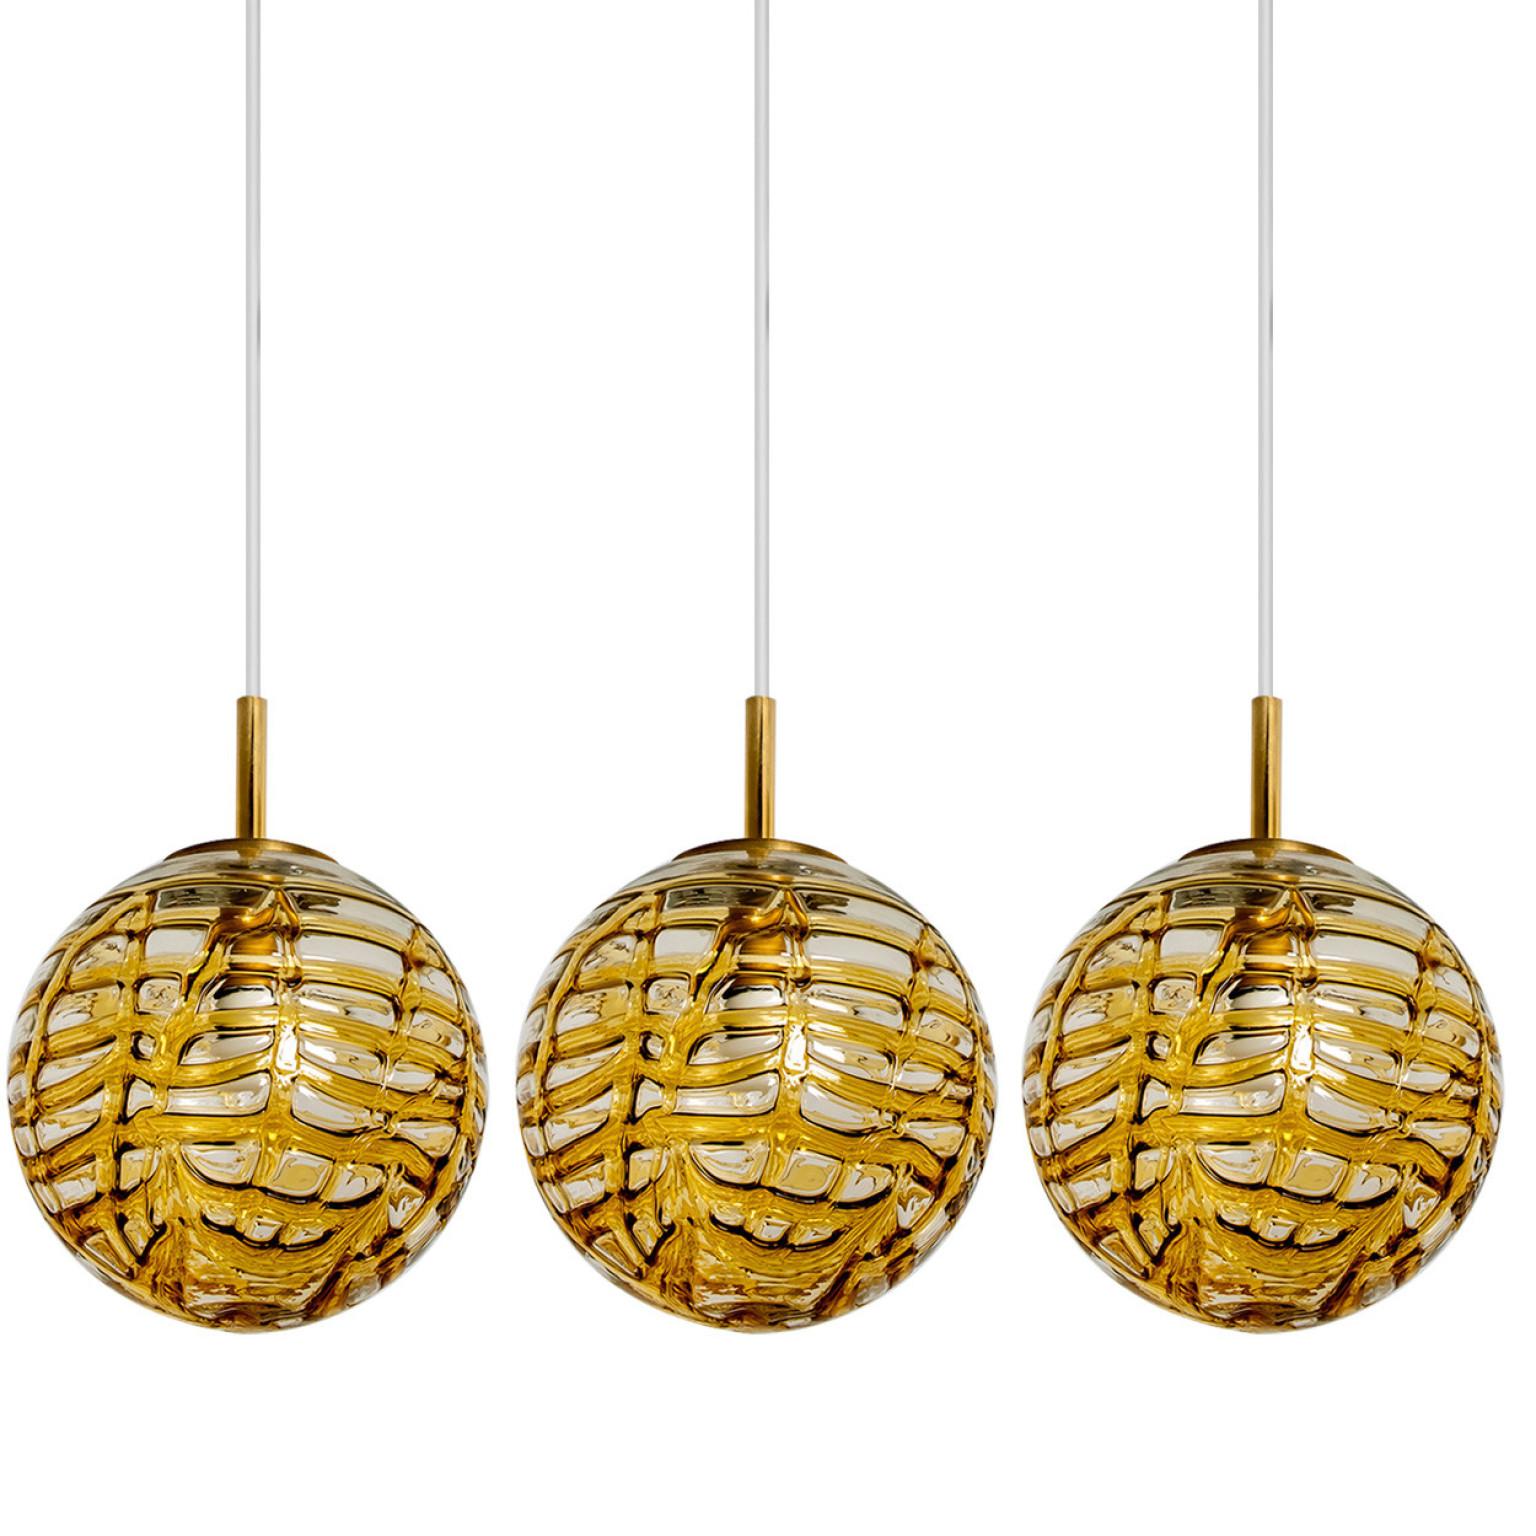 One of the three Doria pendant lights (in collaboration with Murano) in the style of Venini, manufactured, circa 1960. Real statement pieces.
High-end thick Murano crystal glass shade made out of overlay glasses in the color yellow, applied in